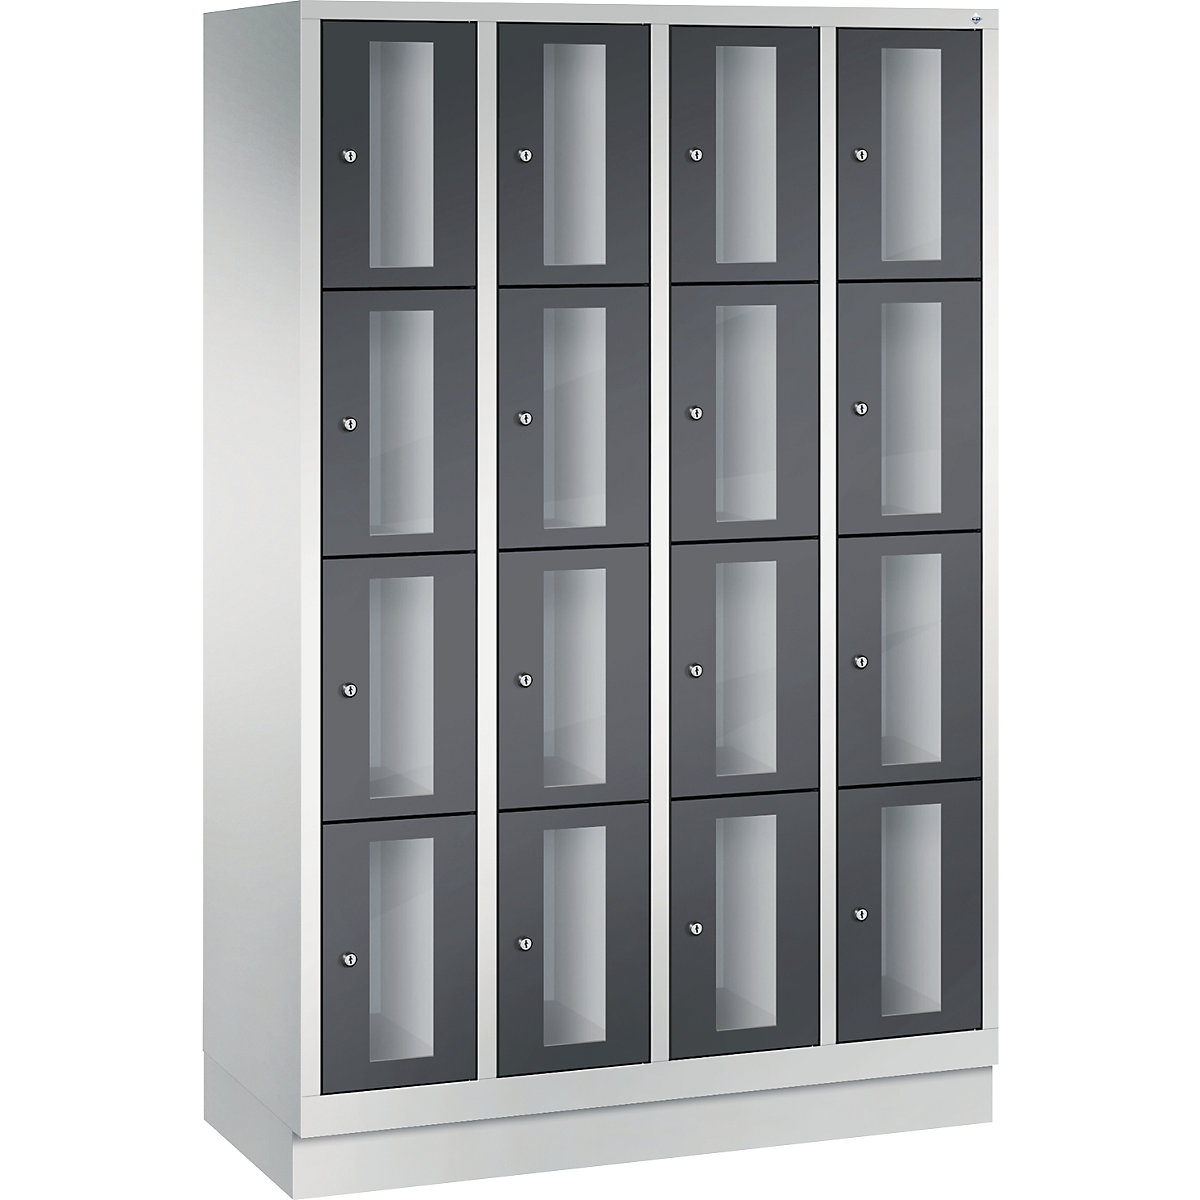 C+P – CLASSIC locker unit, compartment height 375 mm, with plinth, 16 compartments, width 1190 mm, black grey door